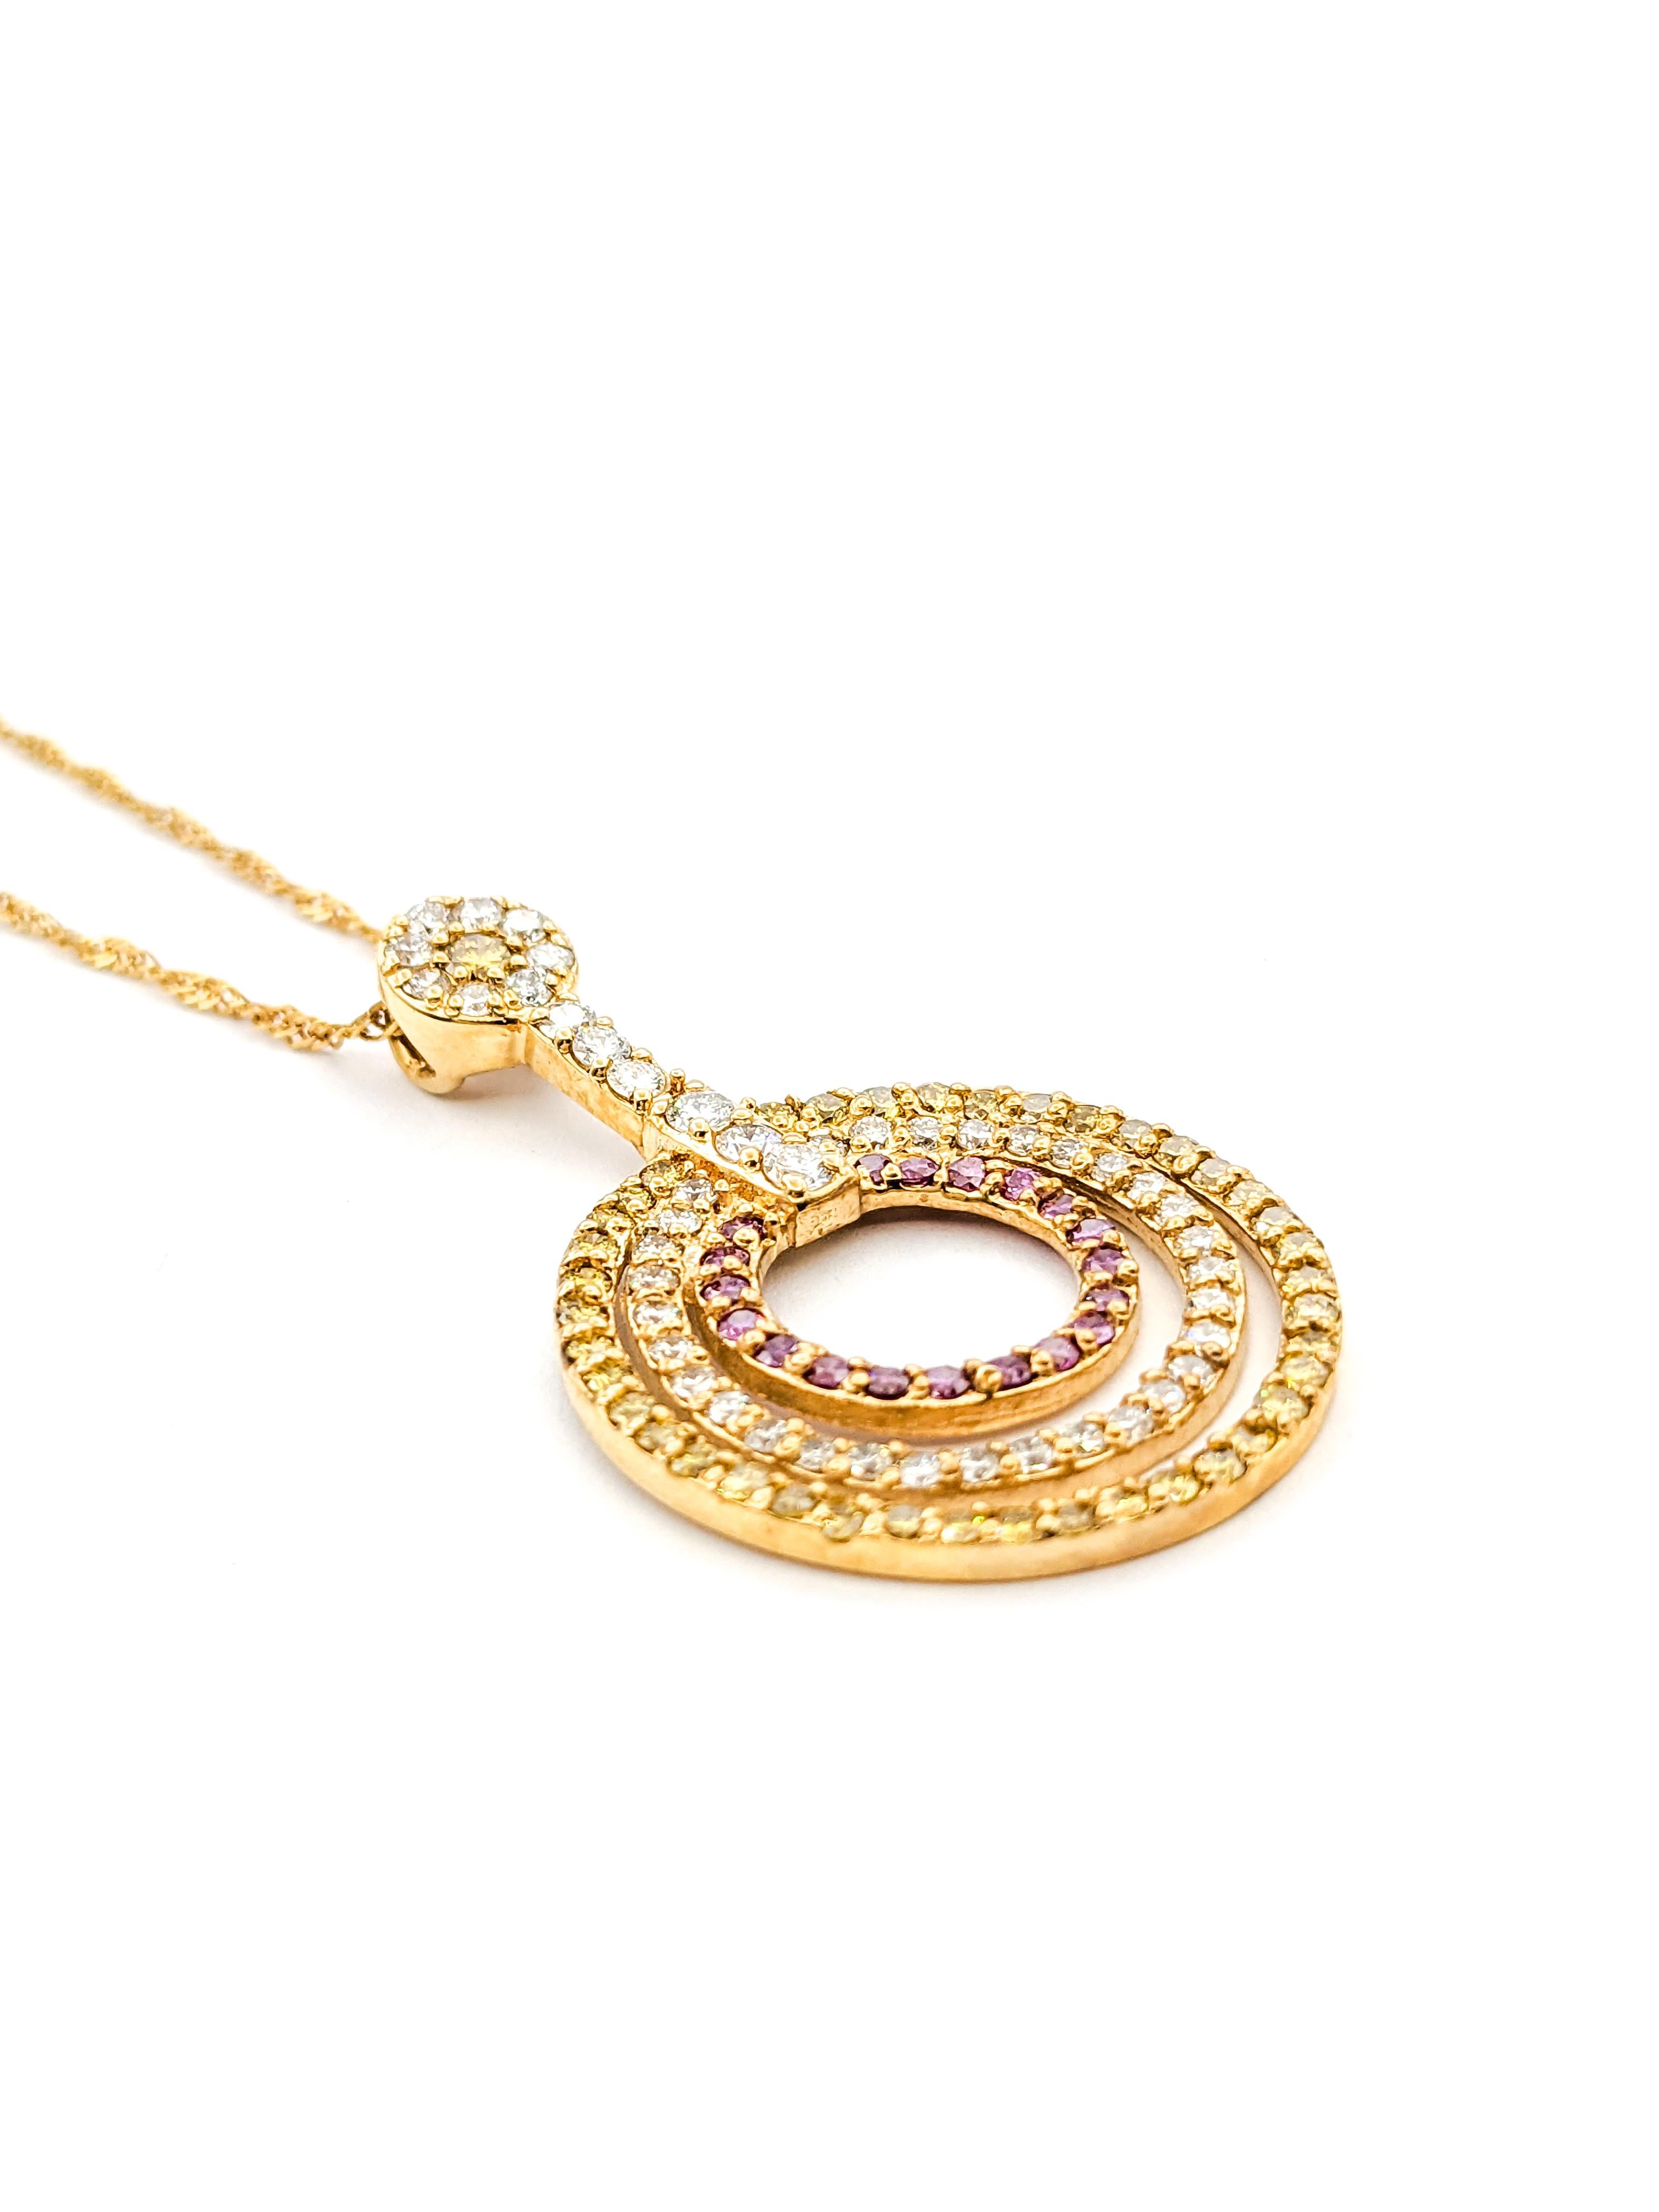 1.83ctw Diamond Concentric Circle Pendant Necklace in Yellow Gold For Sale 1